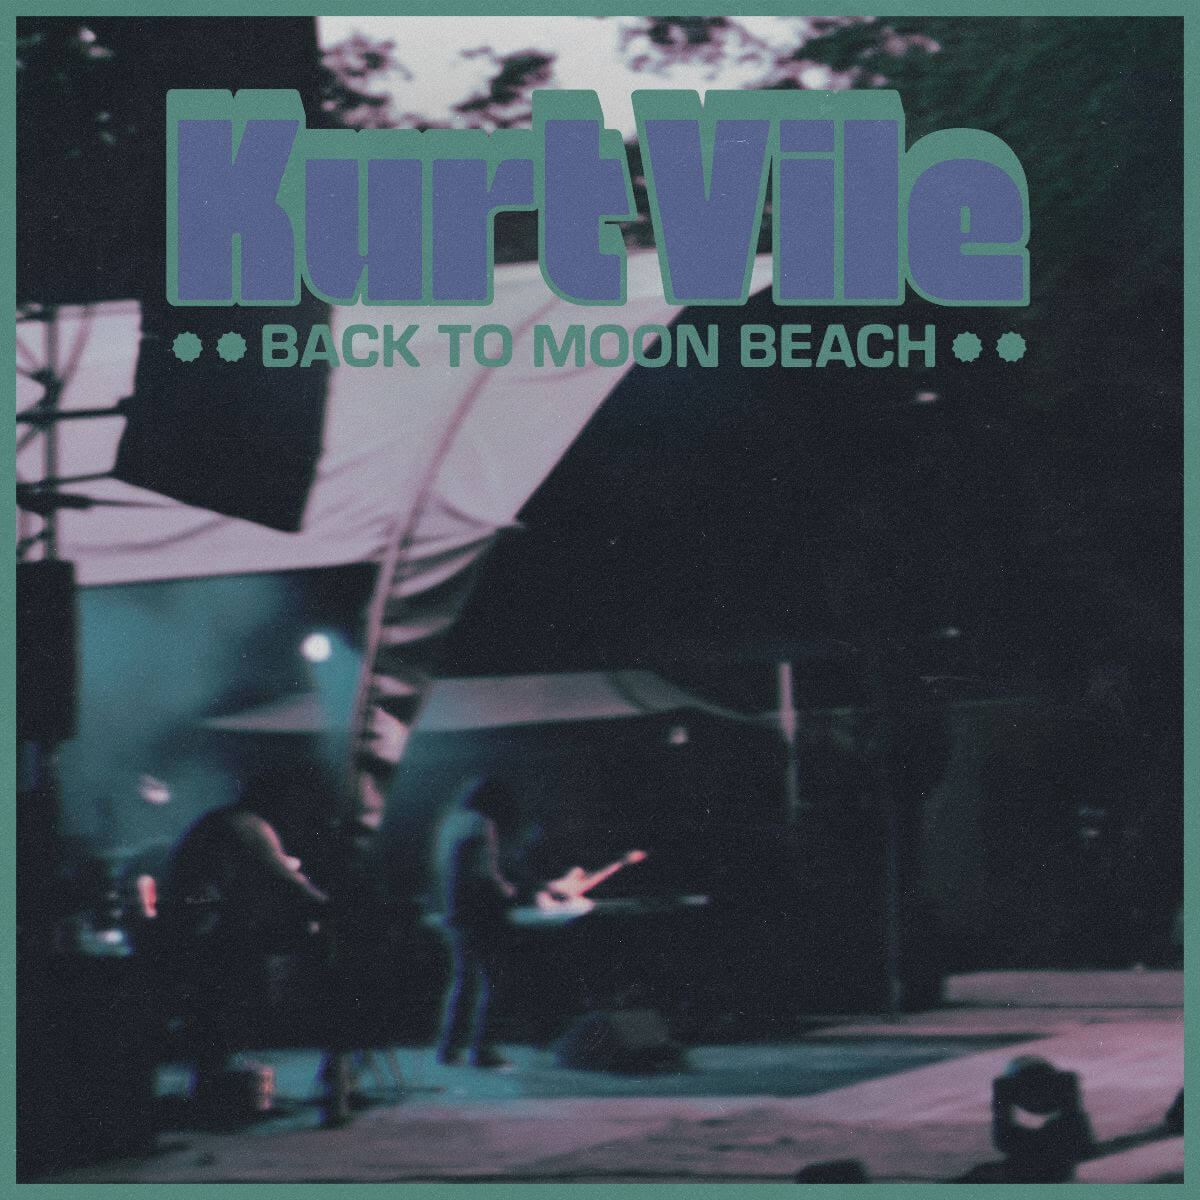 Back to Moon Beach by Kurt Vile album review by Igor Bannikov for Northern Transmissions. The singer/songwriter's EP is now out via Verve